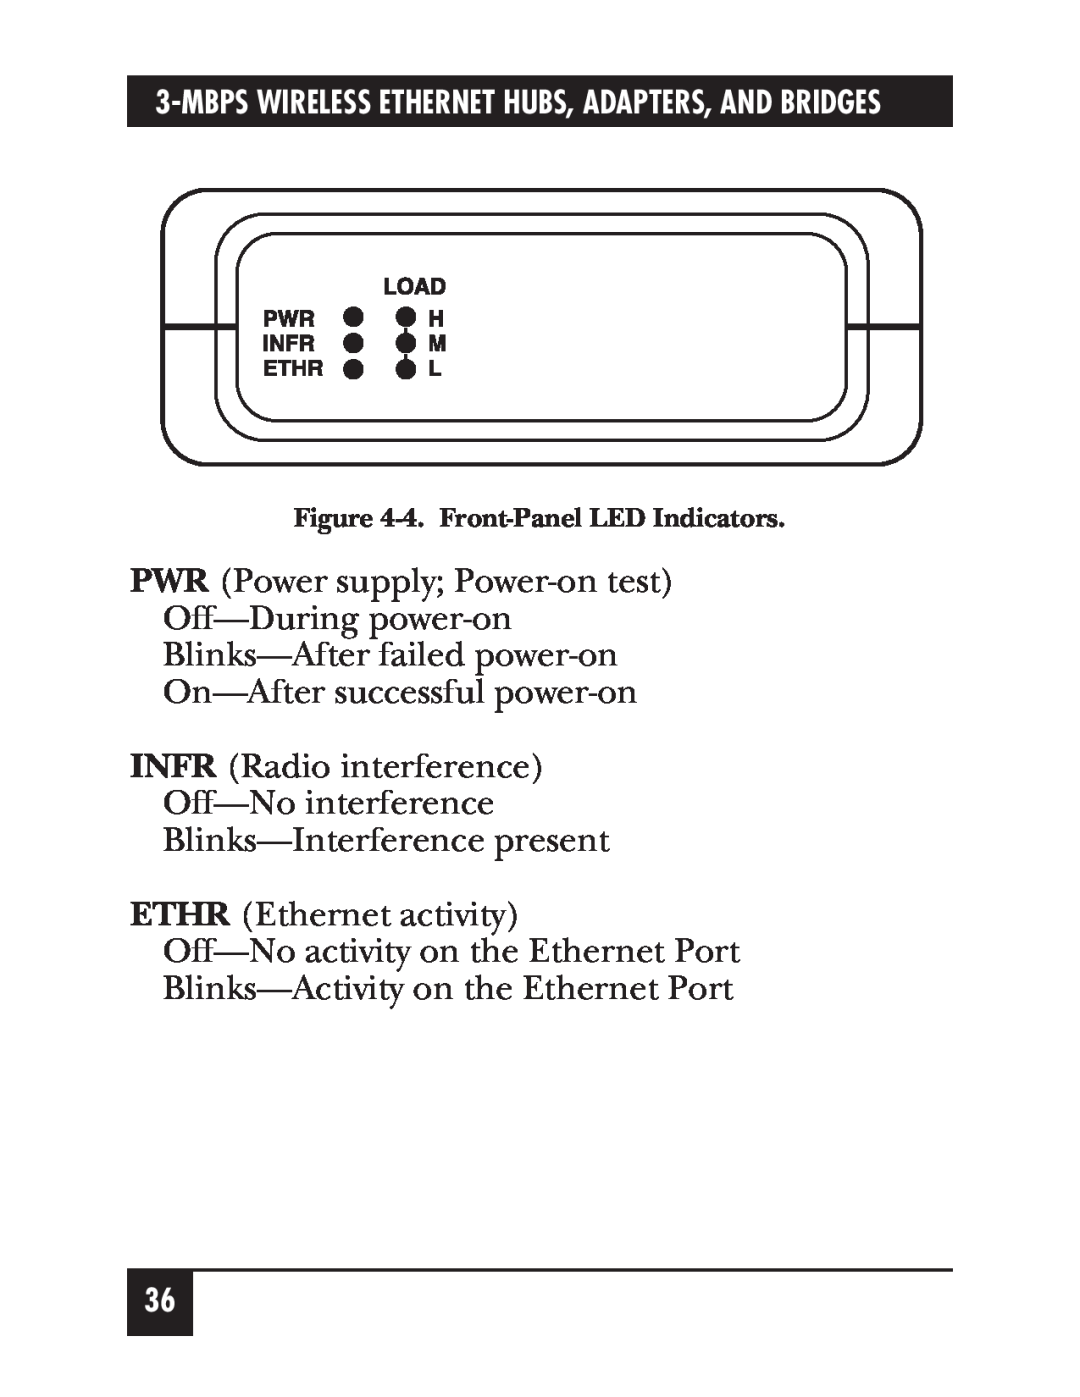 Black Box LW001A, LW012A INFR Radio interference Off-No interference, Blinks-Interference present ETHR Ethernet activity 